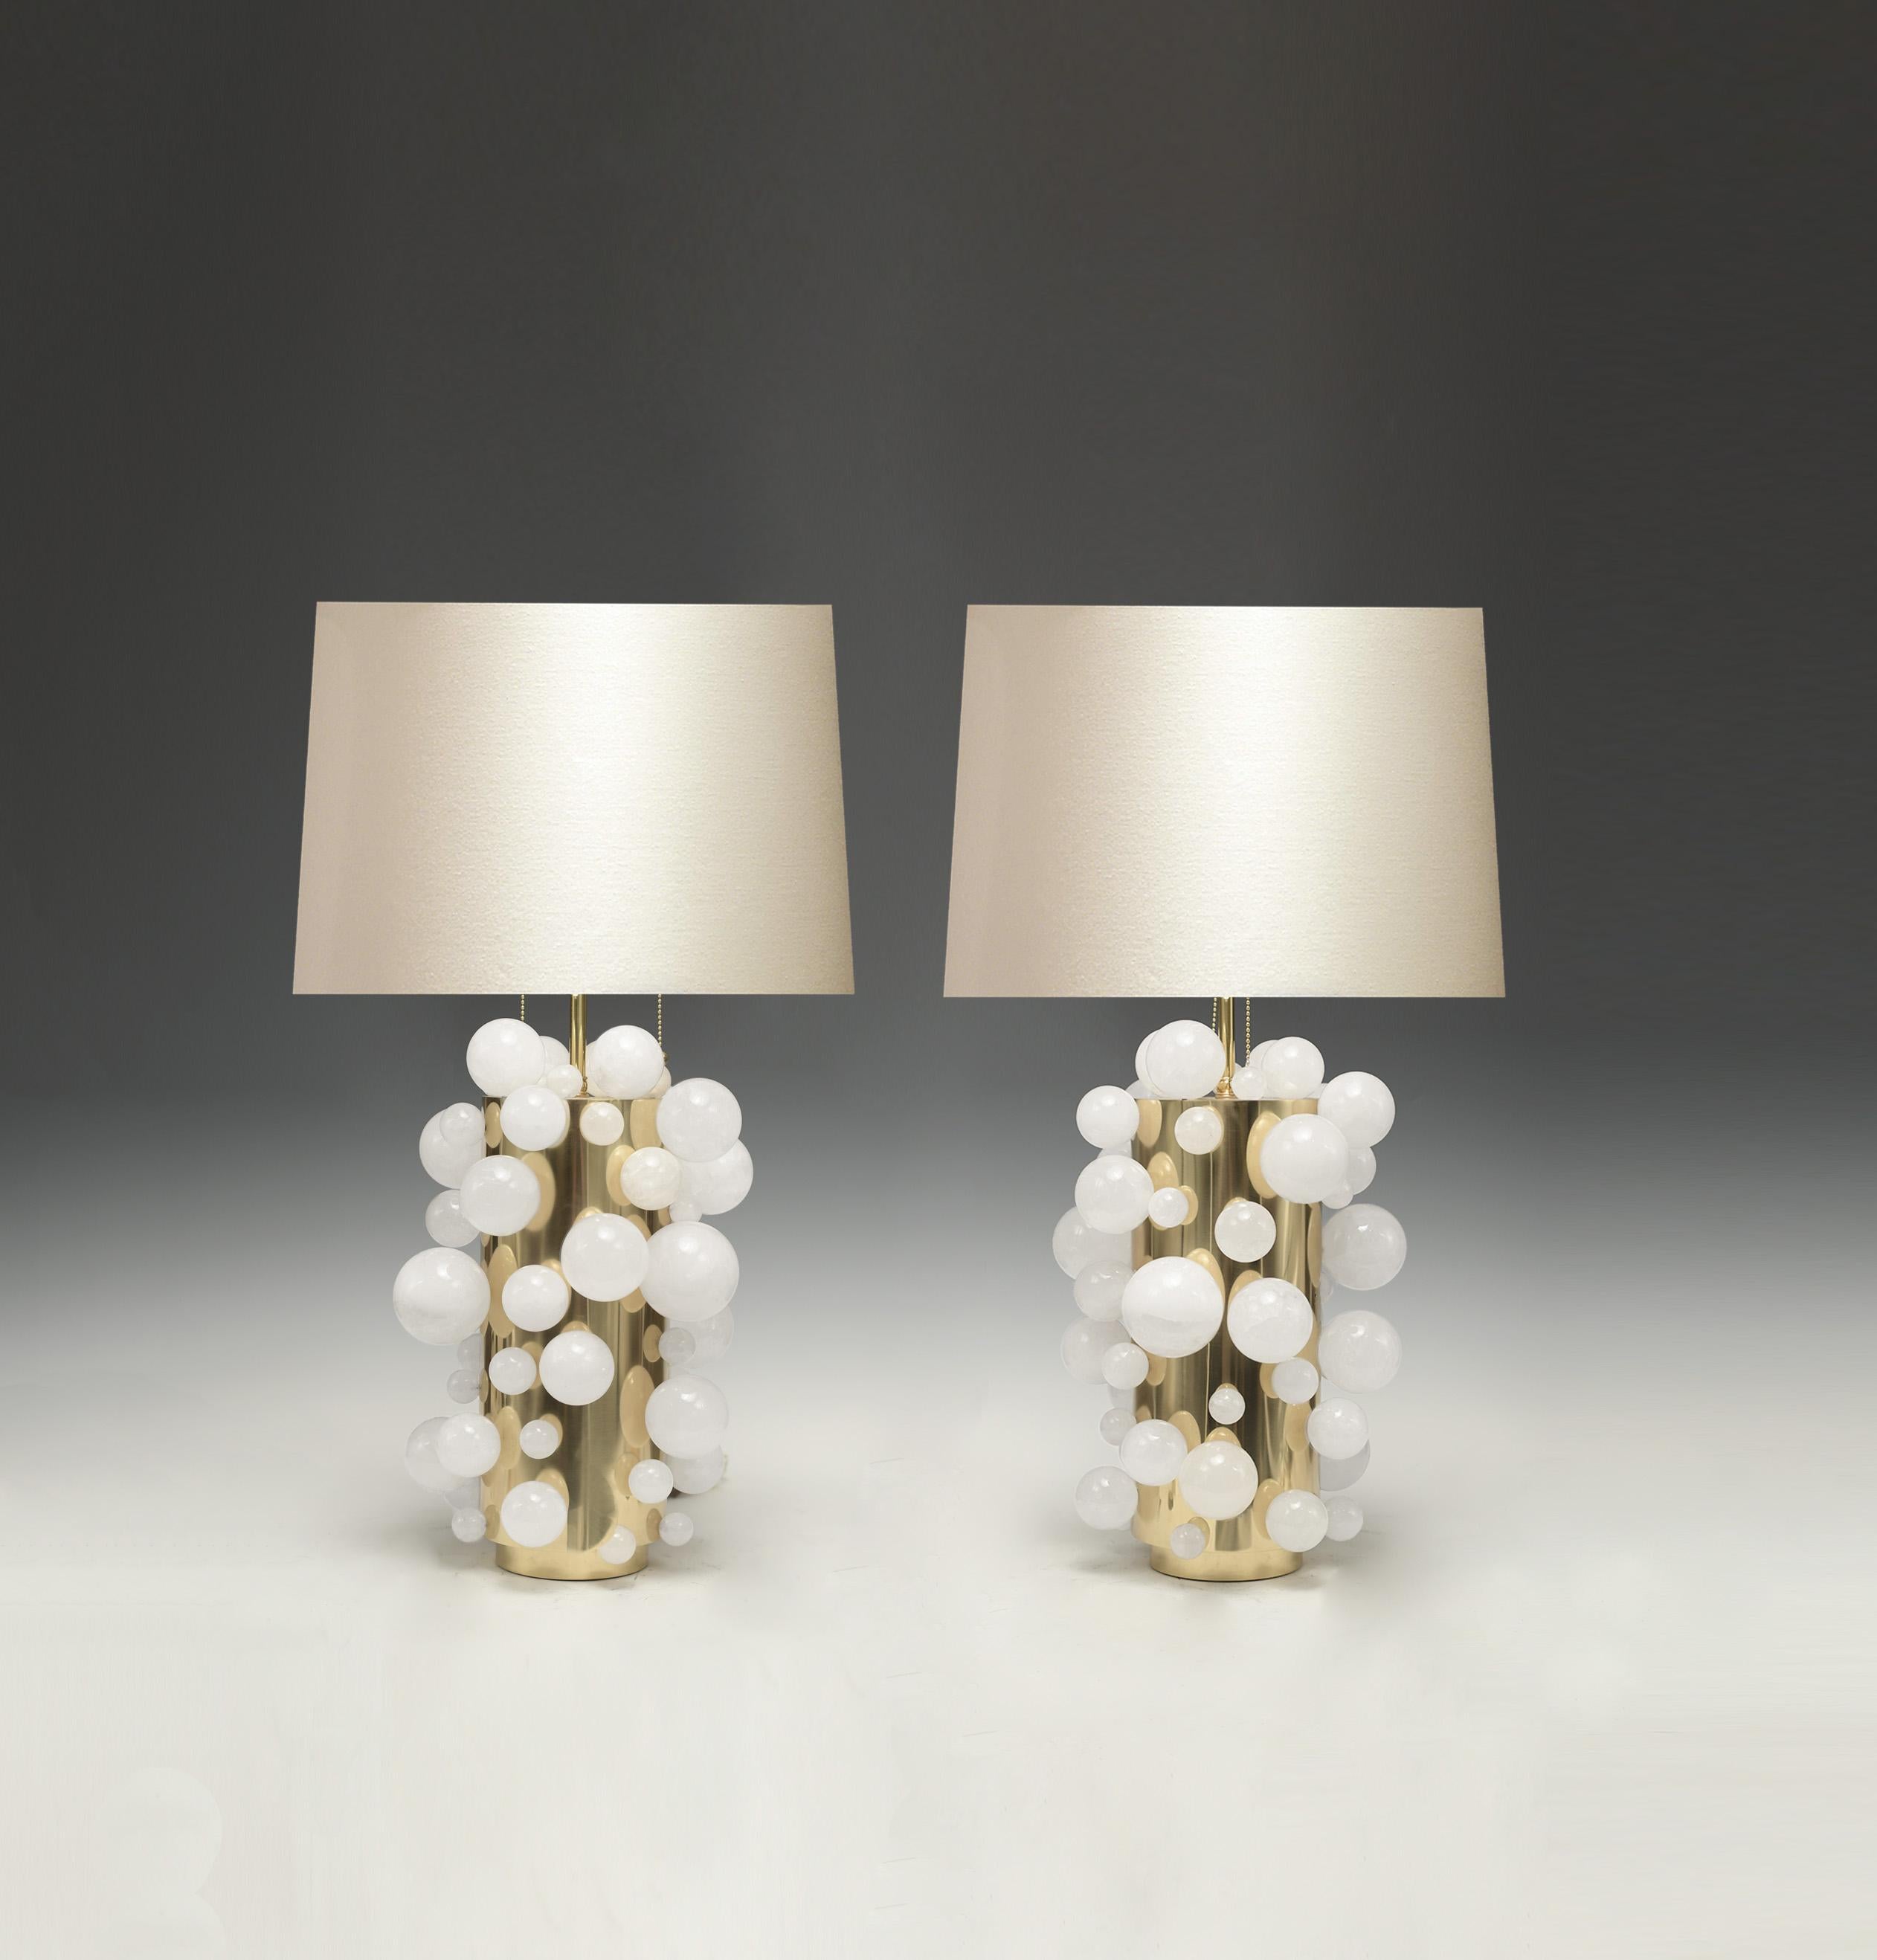 A pair of luxury white rock crystal quartz bulb lamps with polished brass bases, created by Phoenix Gallery, NYC.
Each lamp installed two sockets.
To the top of the rock crystal 17 inch.
Lampshade not included.